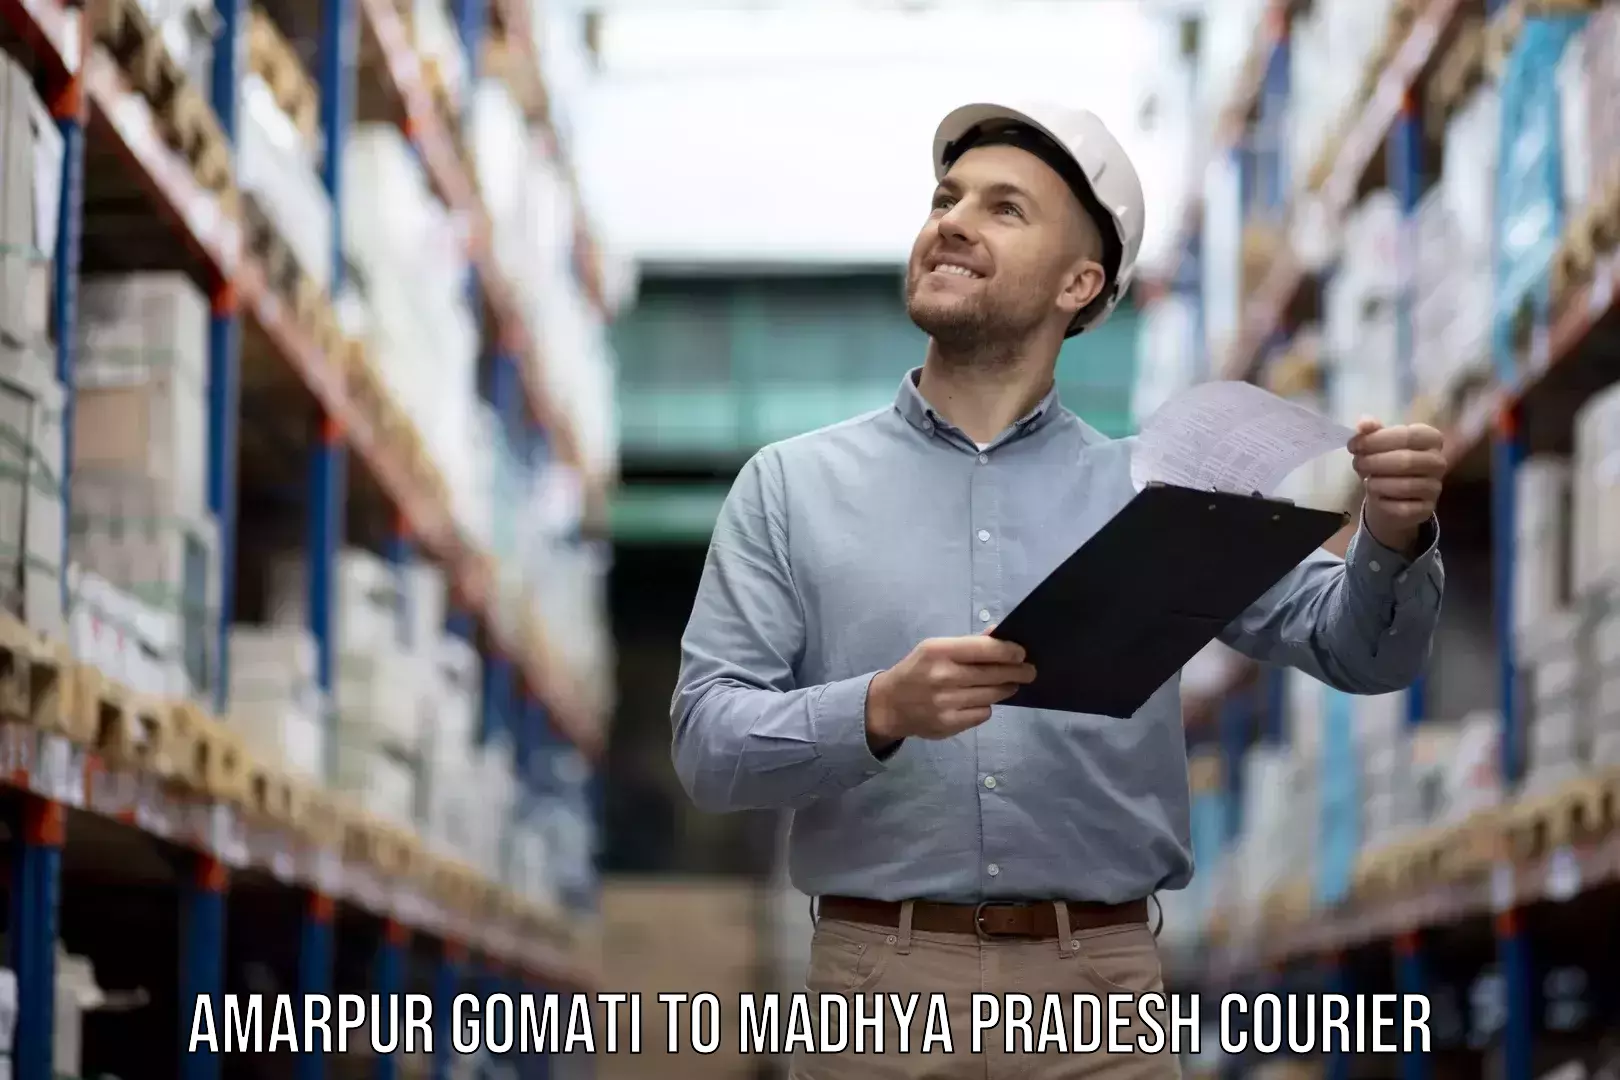 Local moving services Amarpur Gomati to IIIT Bhopal